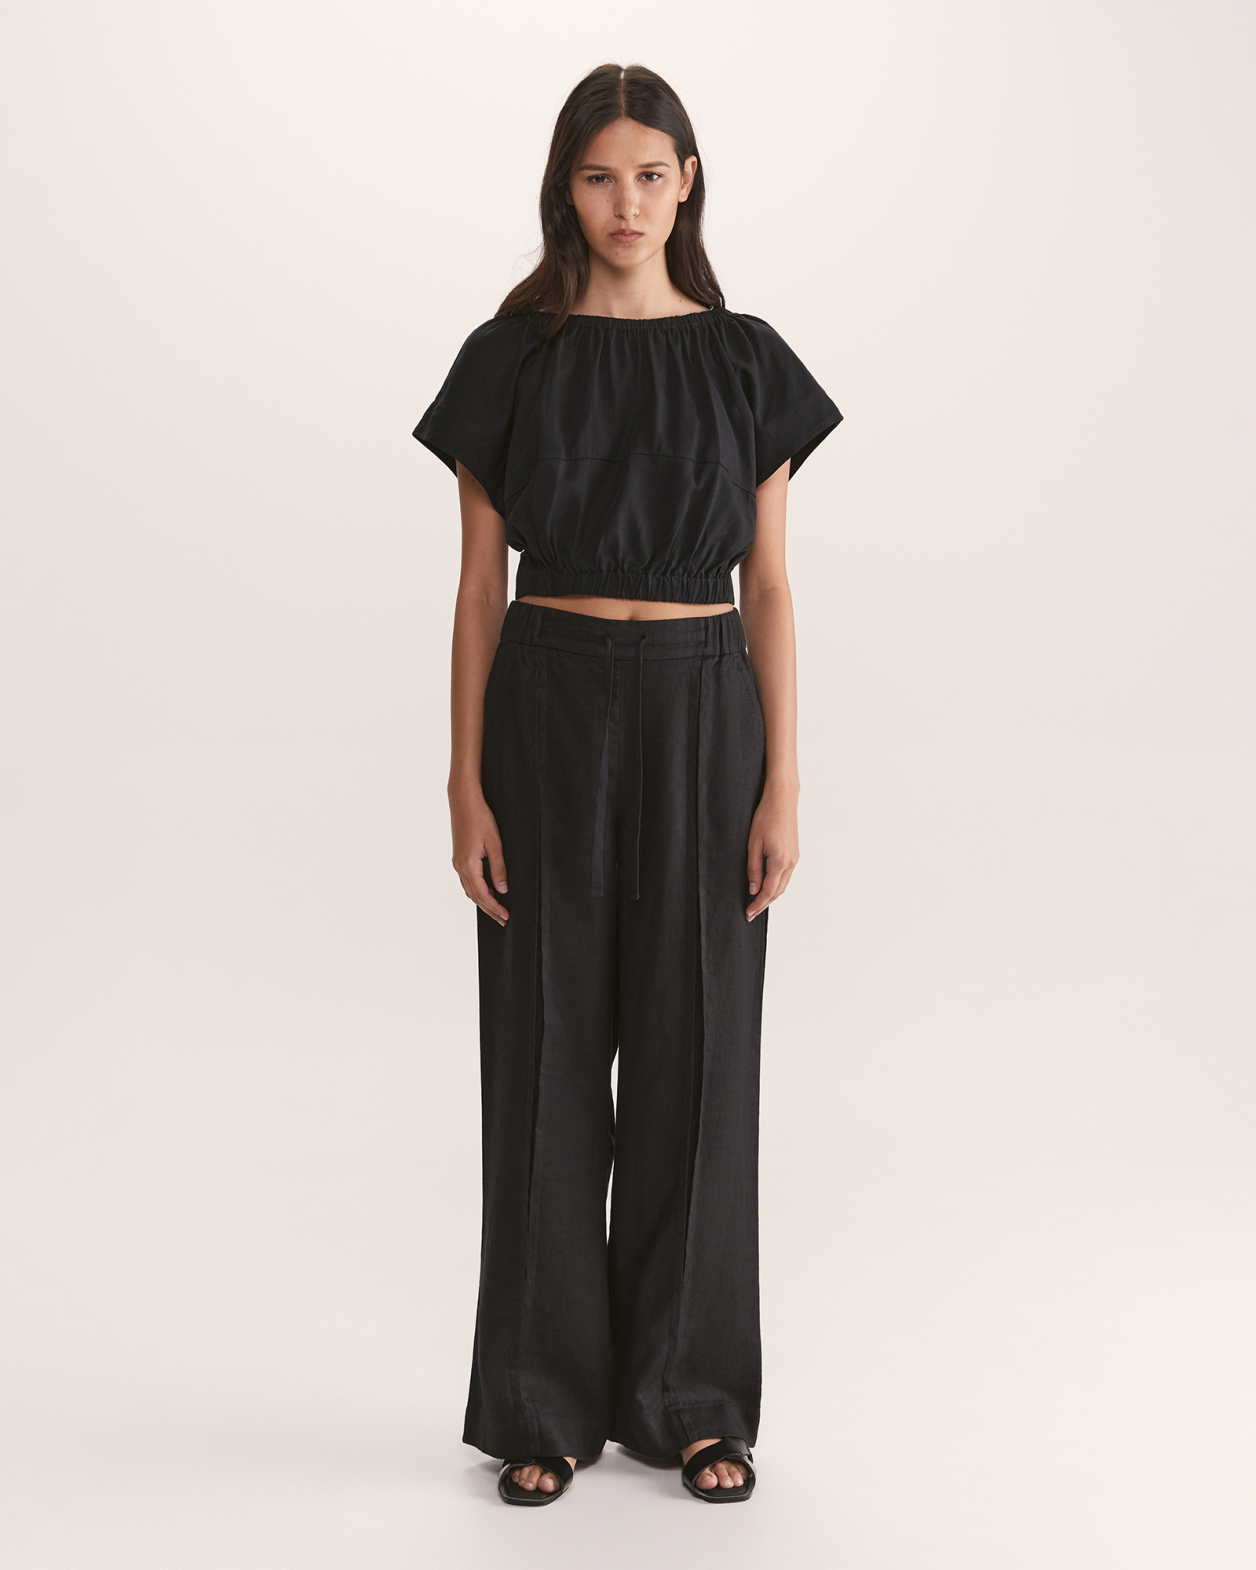 Lila Linen Detailed Pant in BLACK